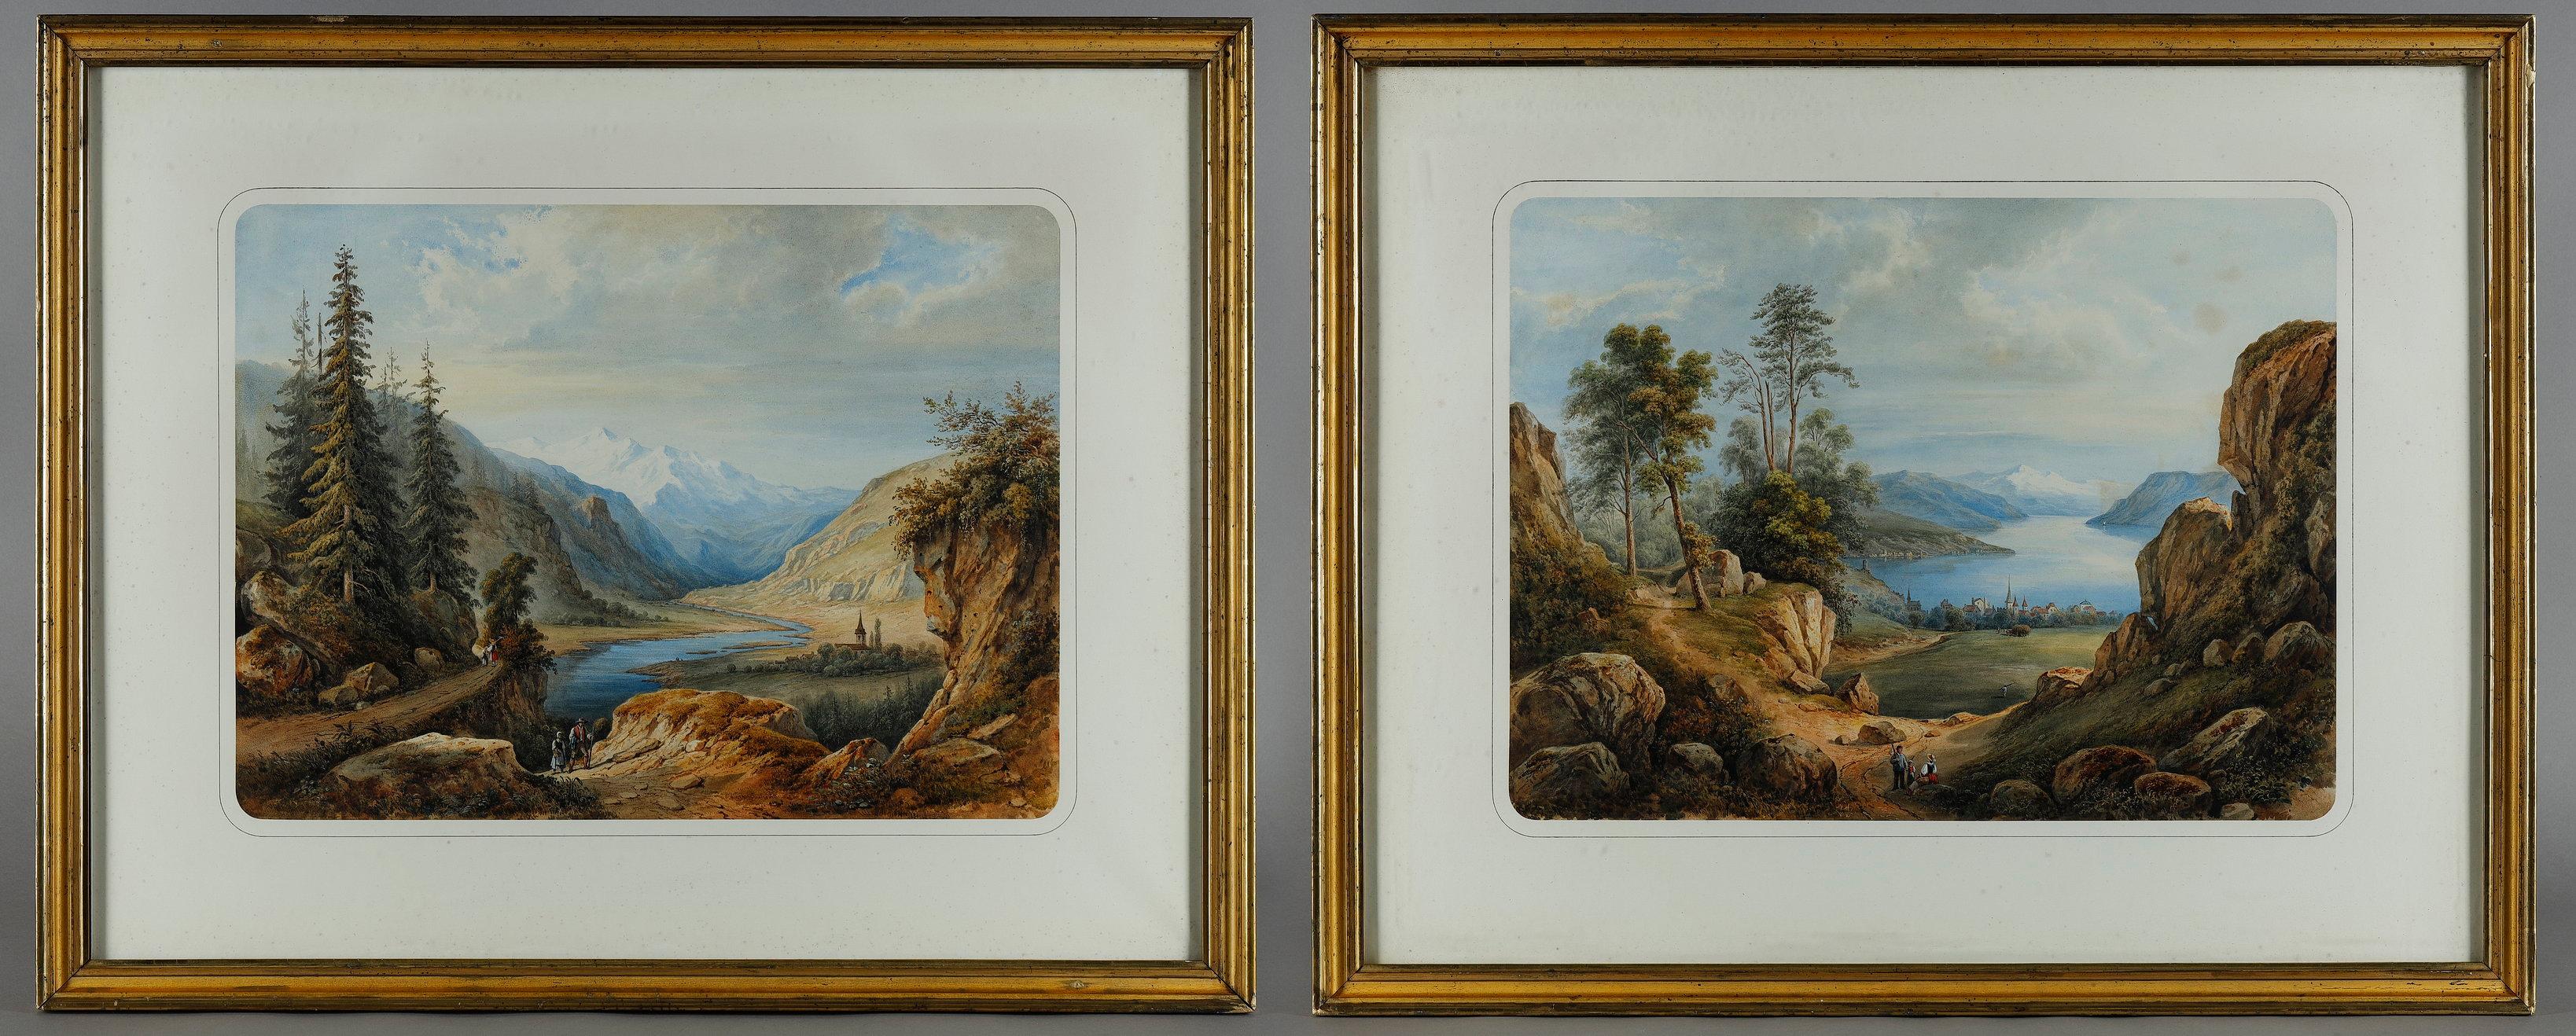 Two large pendant watercolors depicting lake and mountain river landscapes in Switzerland. Localized: the course of the Aare. Circa: 1840

François Jules Collignon was born in 1811 in Amersfoort, Utrecht, and died at the age of 35 in Bry sur Marne.